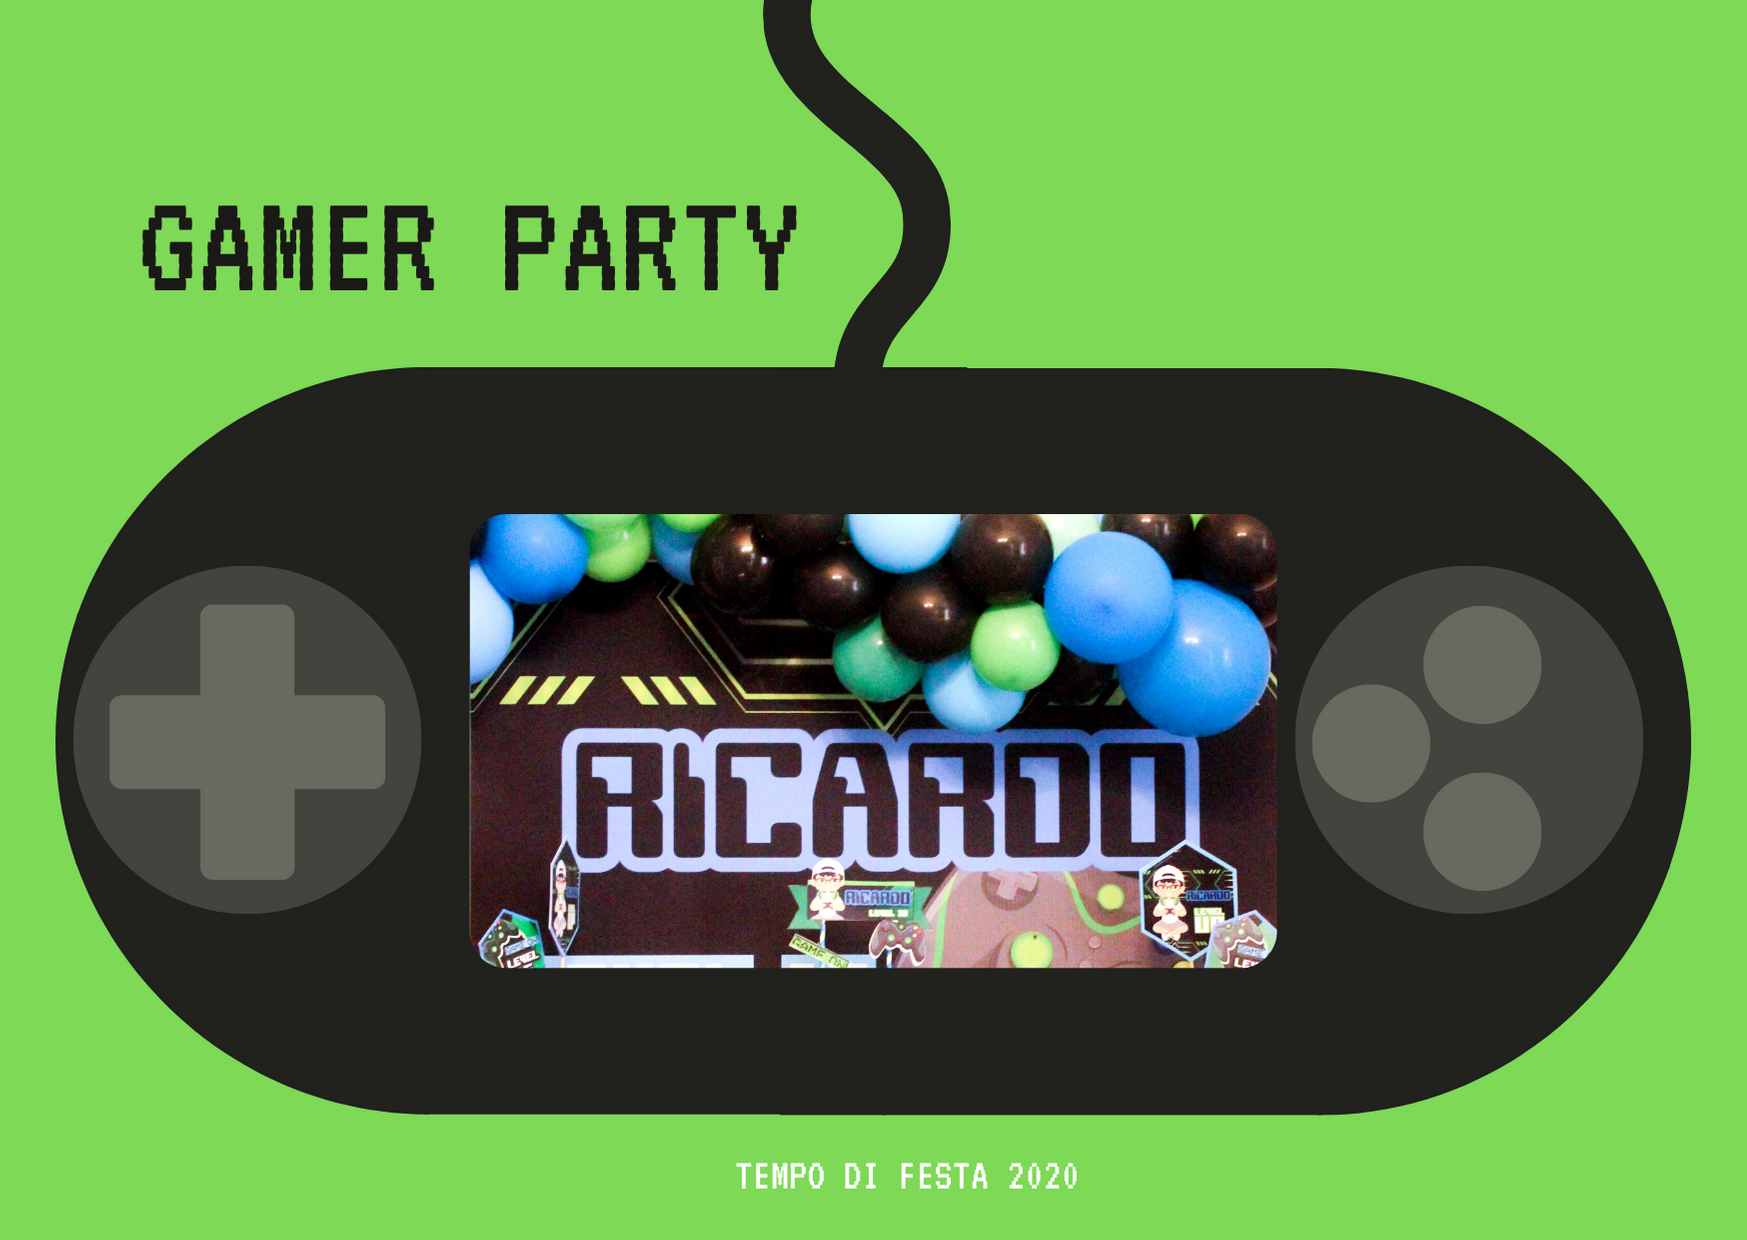 gamer party 2020 corta